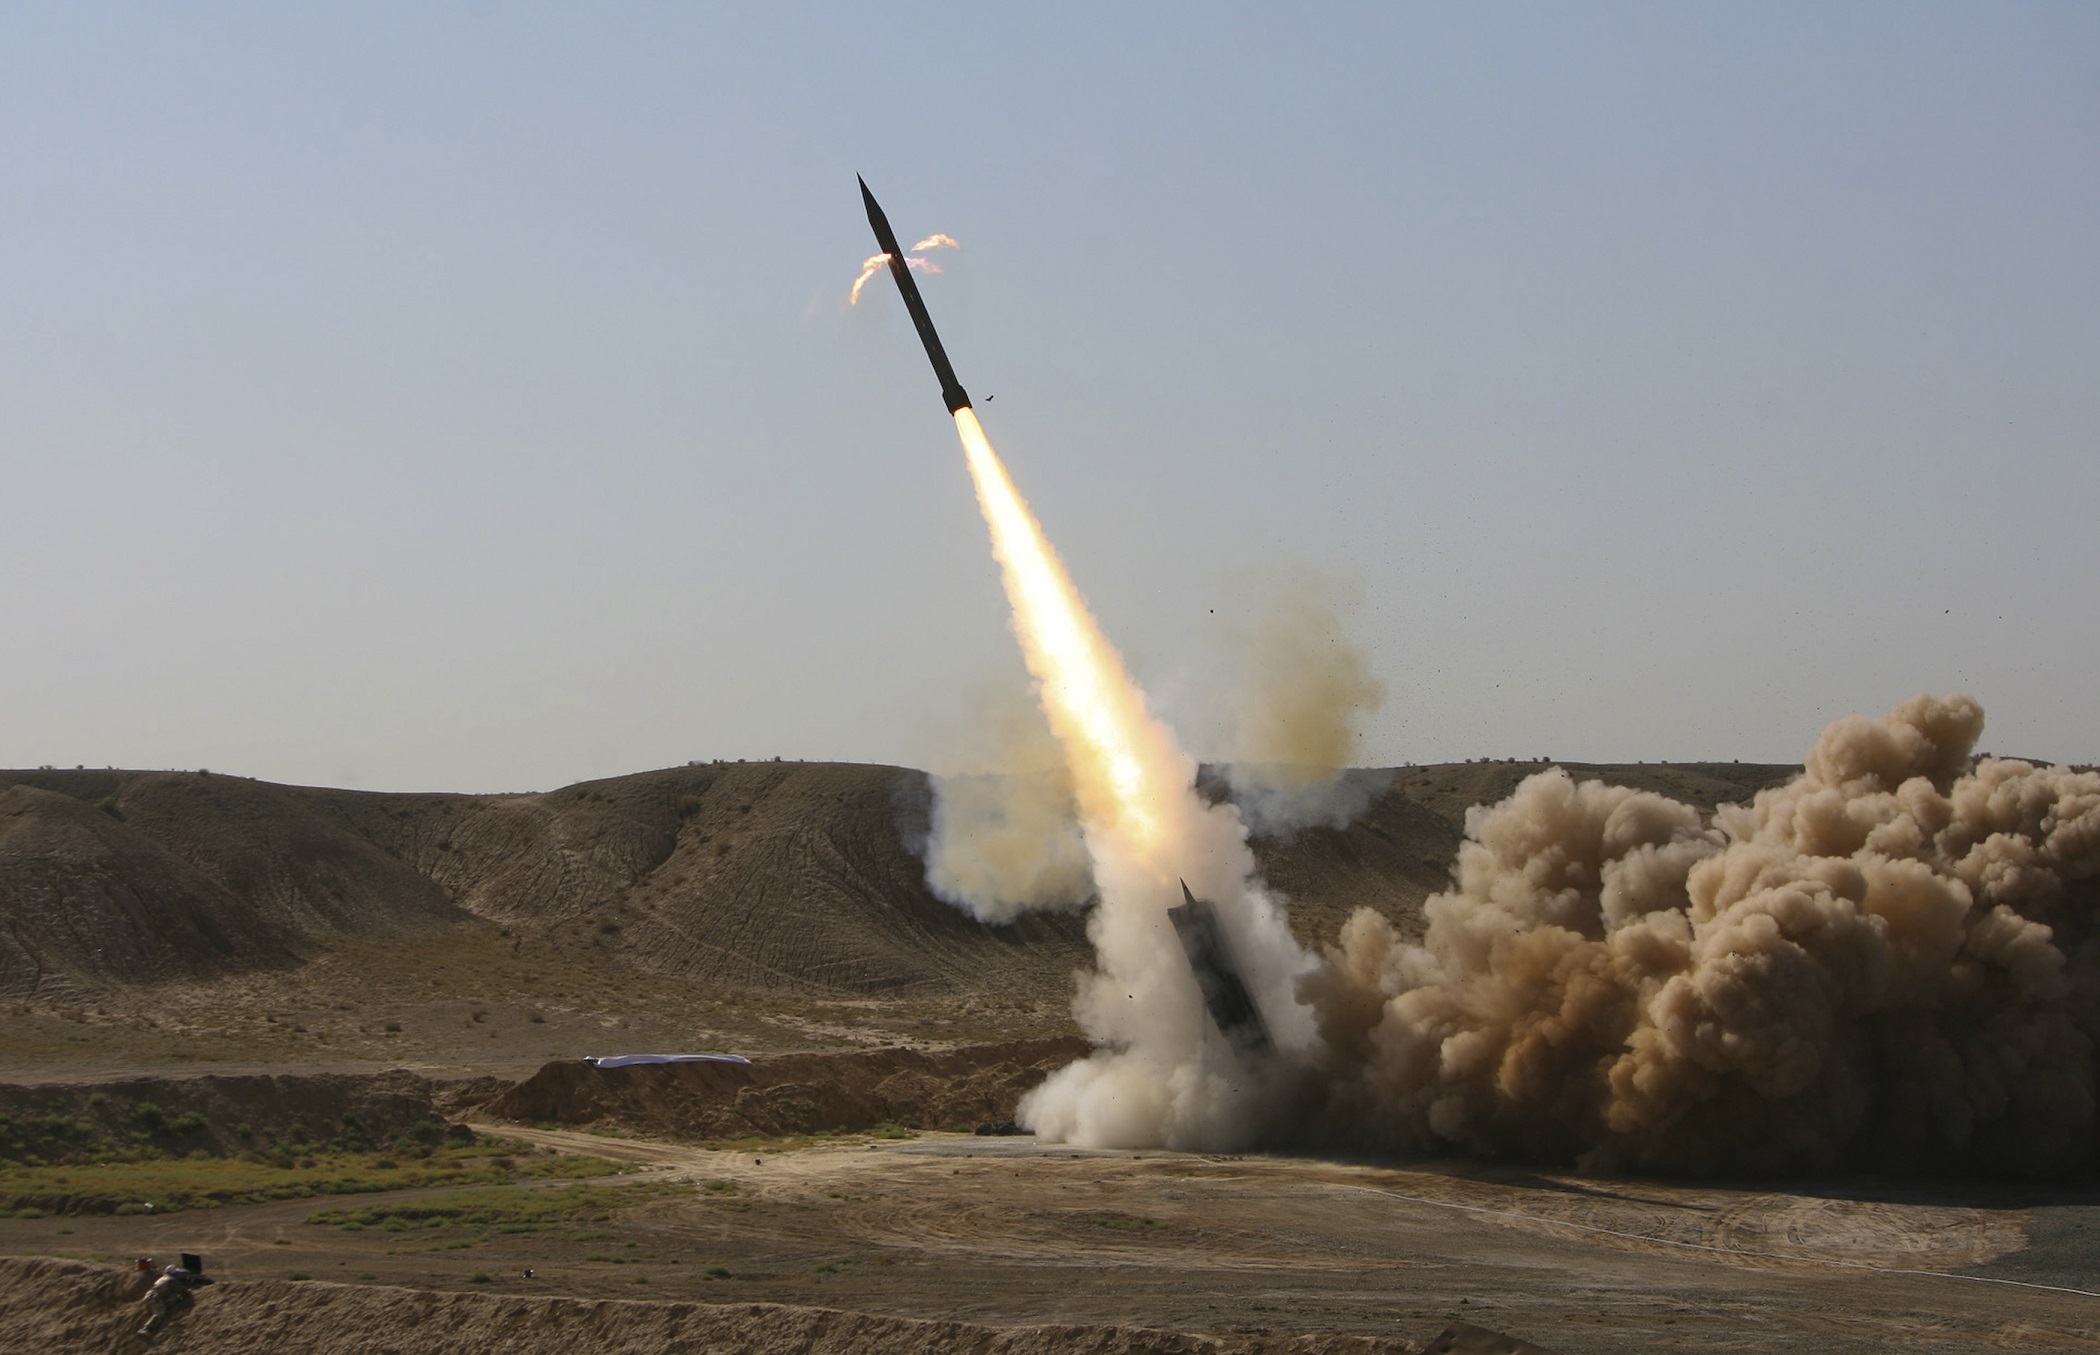 An Iranian Zelzal missile is launched during a test at an unknown location in central Iran